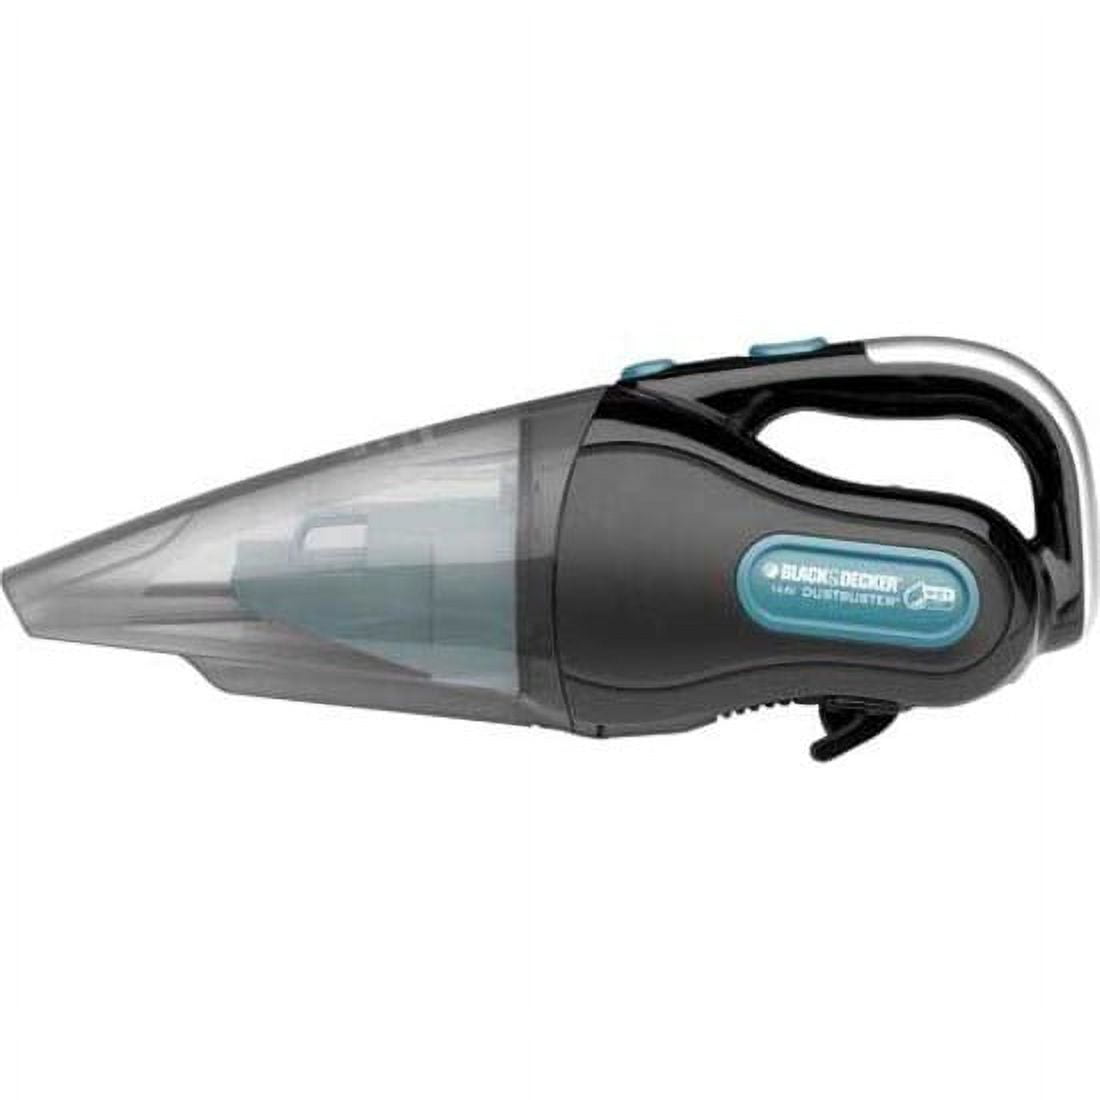 Black & Decker Cordless Dustbuster Pivot Handheld Vacuum Cleaner, 14.4 V  1.5 Ah Li-Ion Battery with Charging Base, 440 ml, 28 Air Watts Suction  Power, Champagne/White - PV1420L-B5 price in Saudi Arabia